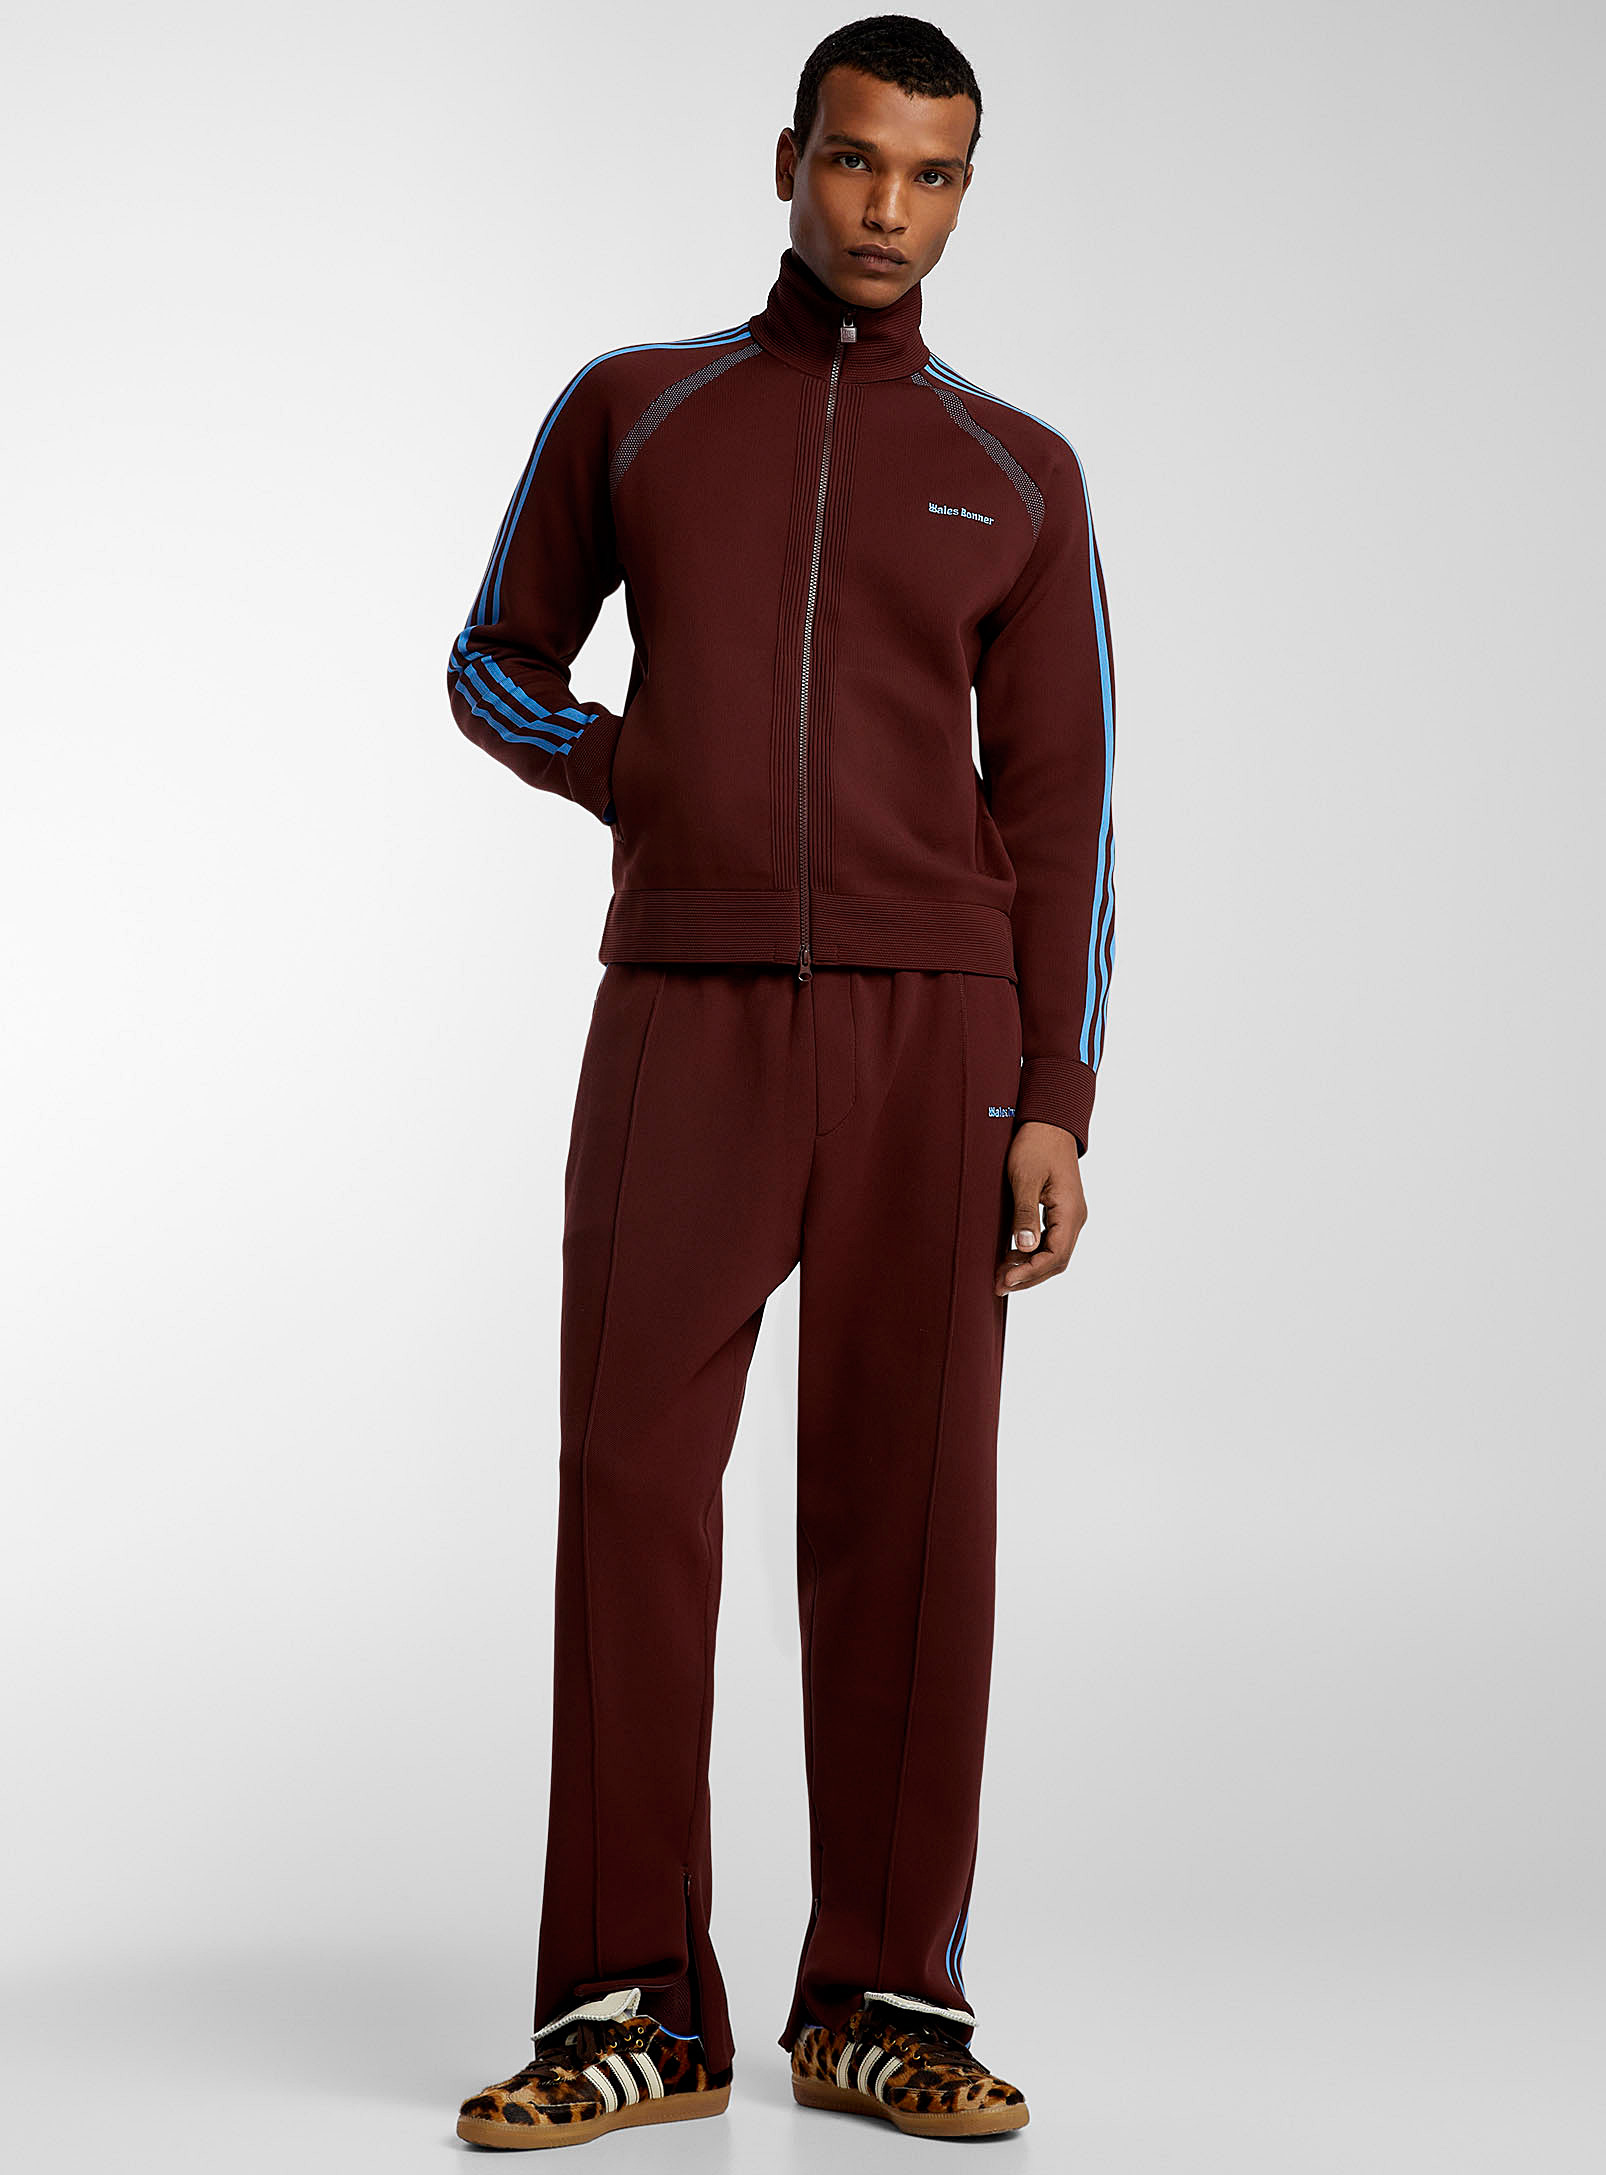 Adidas X Wales Bonner Statement Knit Track Pant In Brown